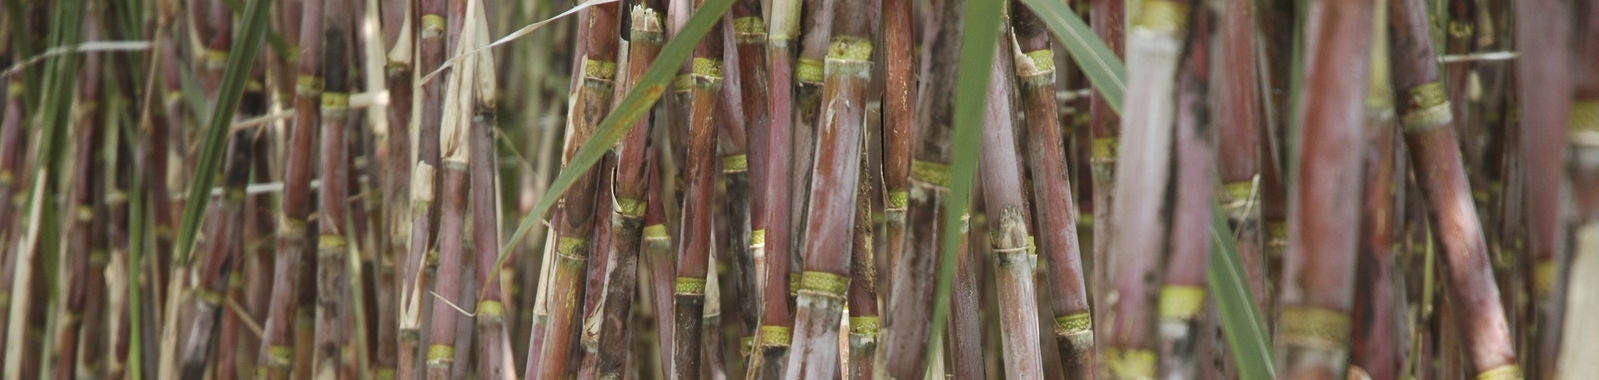 All sugarcane articles